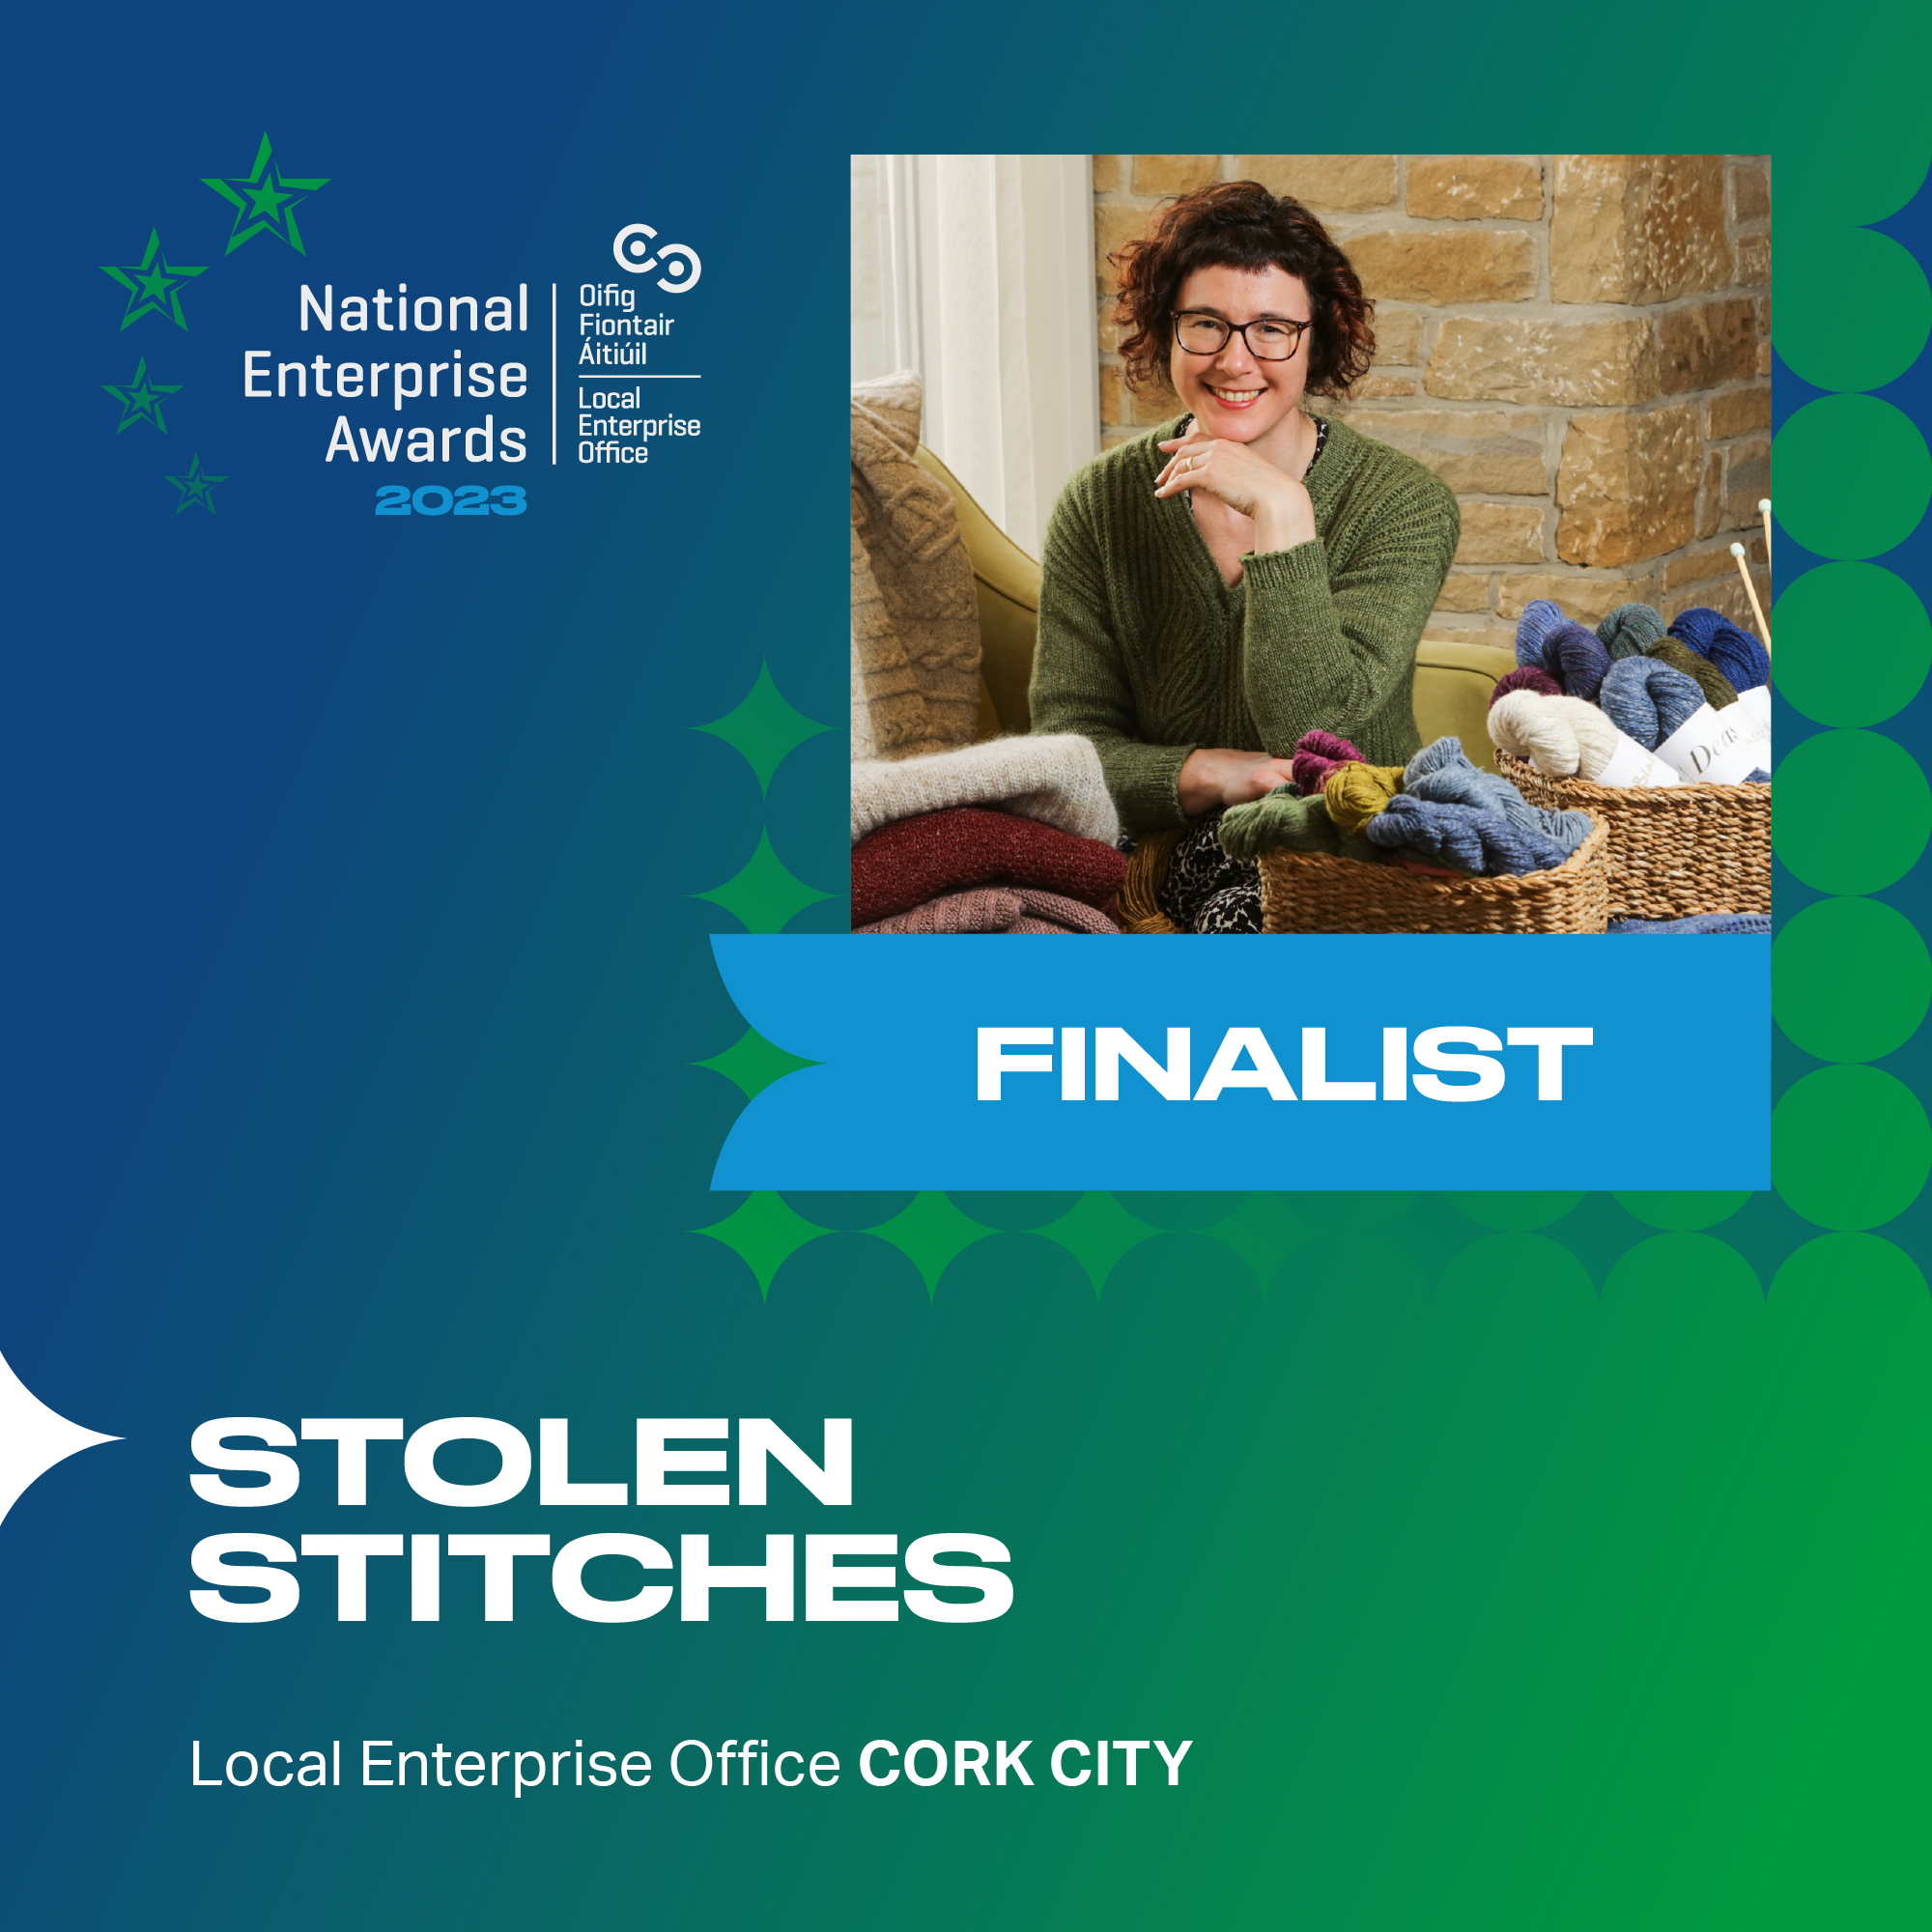 STOLEN STITCHES ANOUNCED FOR NATIONAL ENTERPRISE AWARDS FINAL